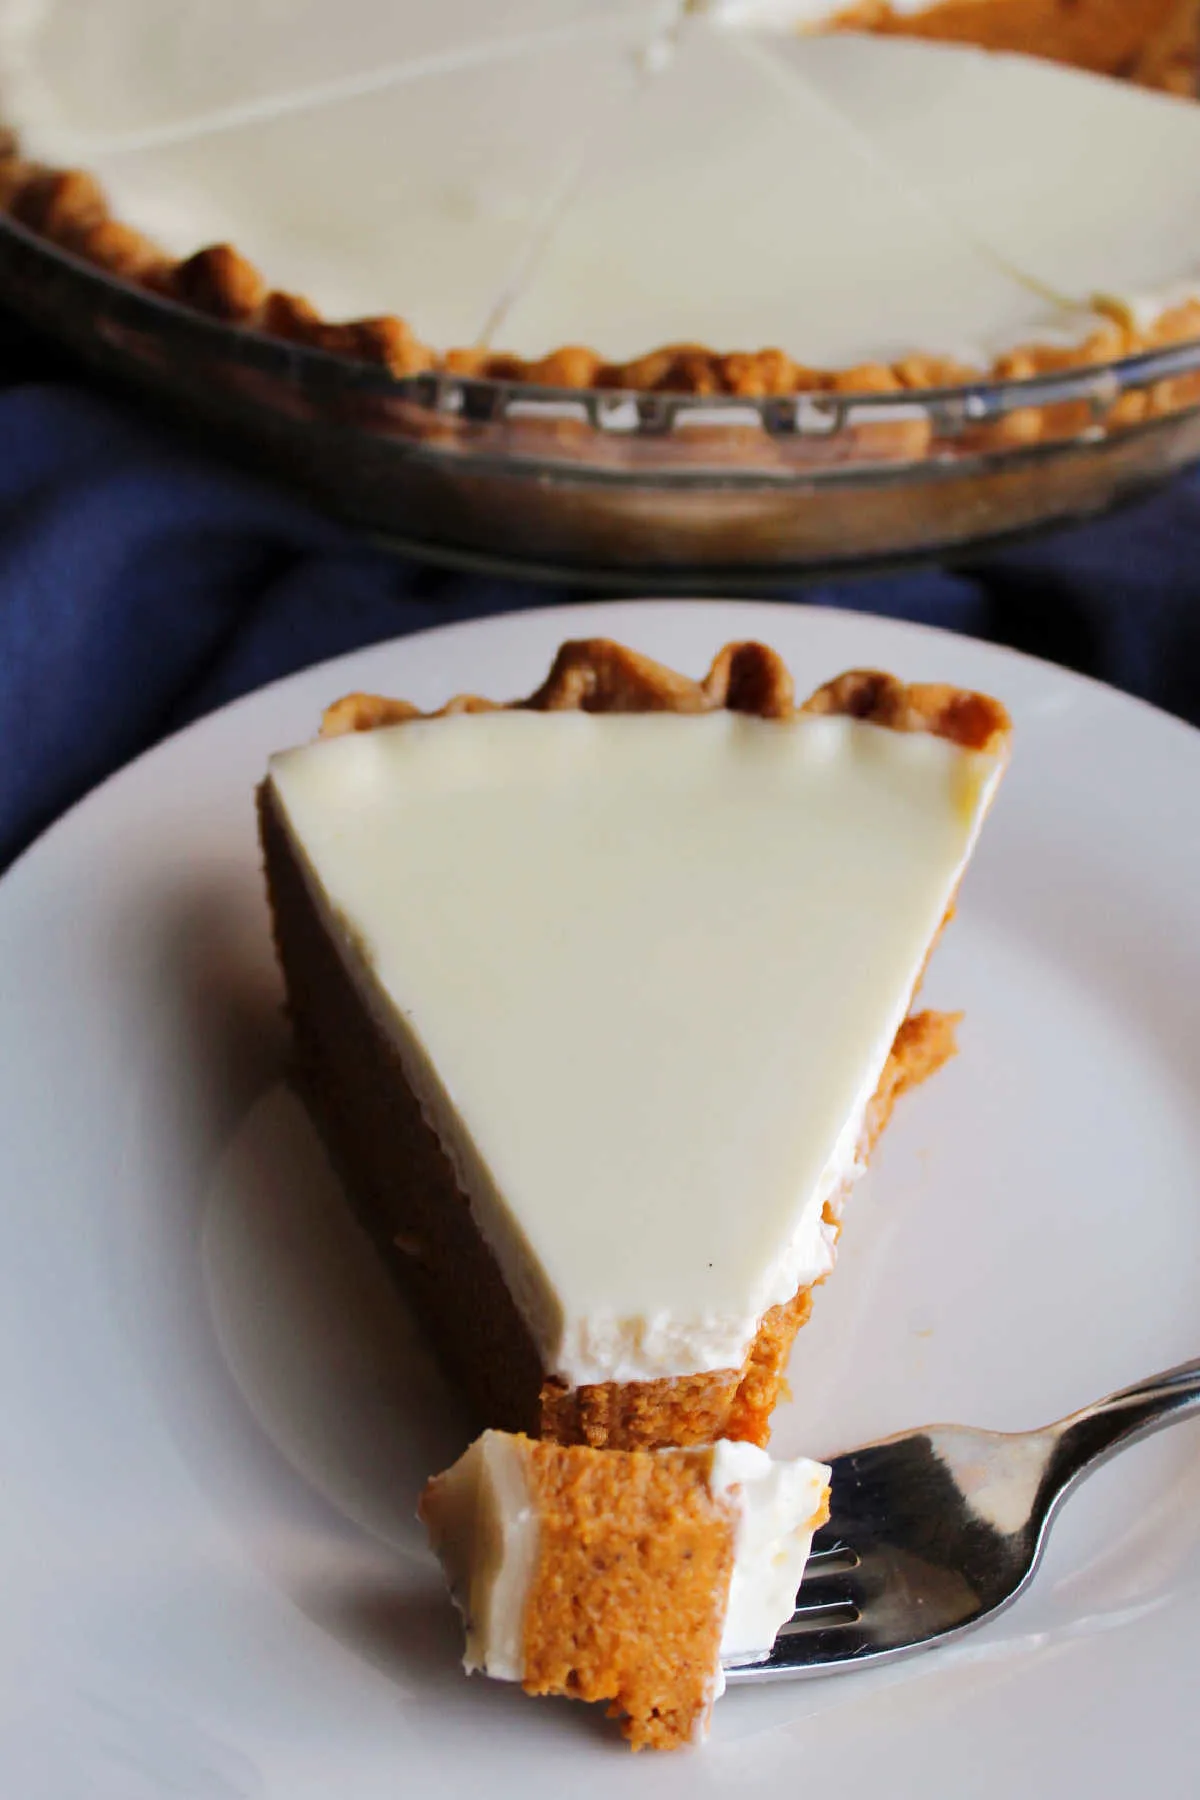 Bite of pumpkin pie on fork laying on plate next to slice of pumpkin pie with smooth sour cream topping covering the top.